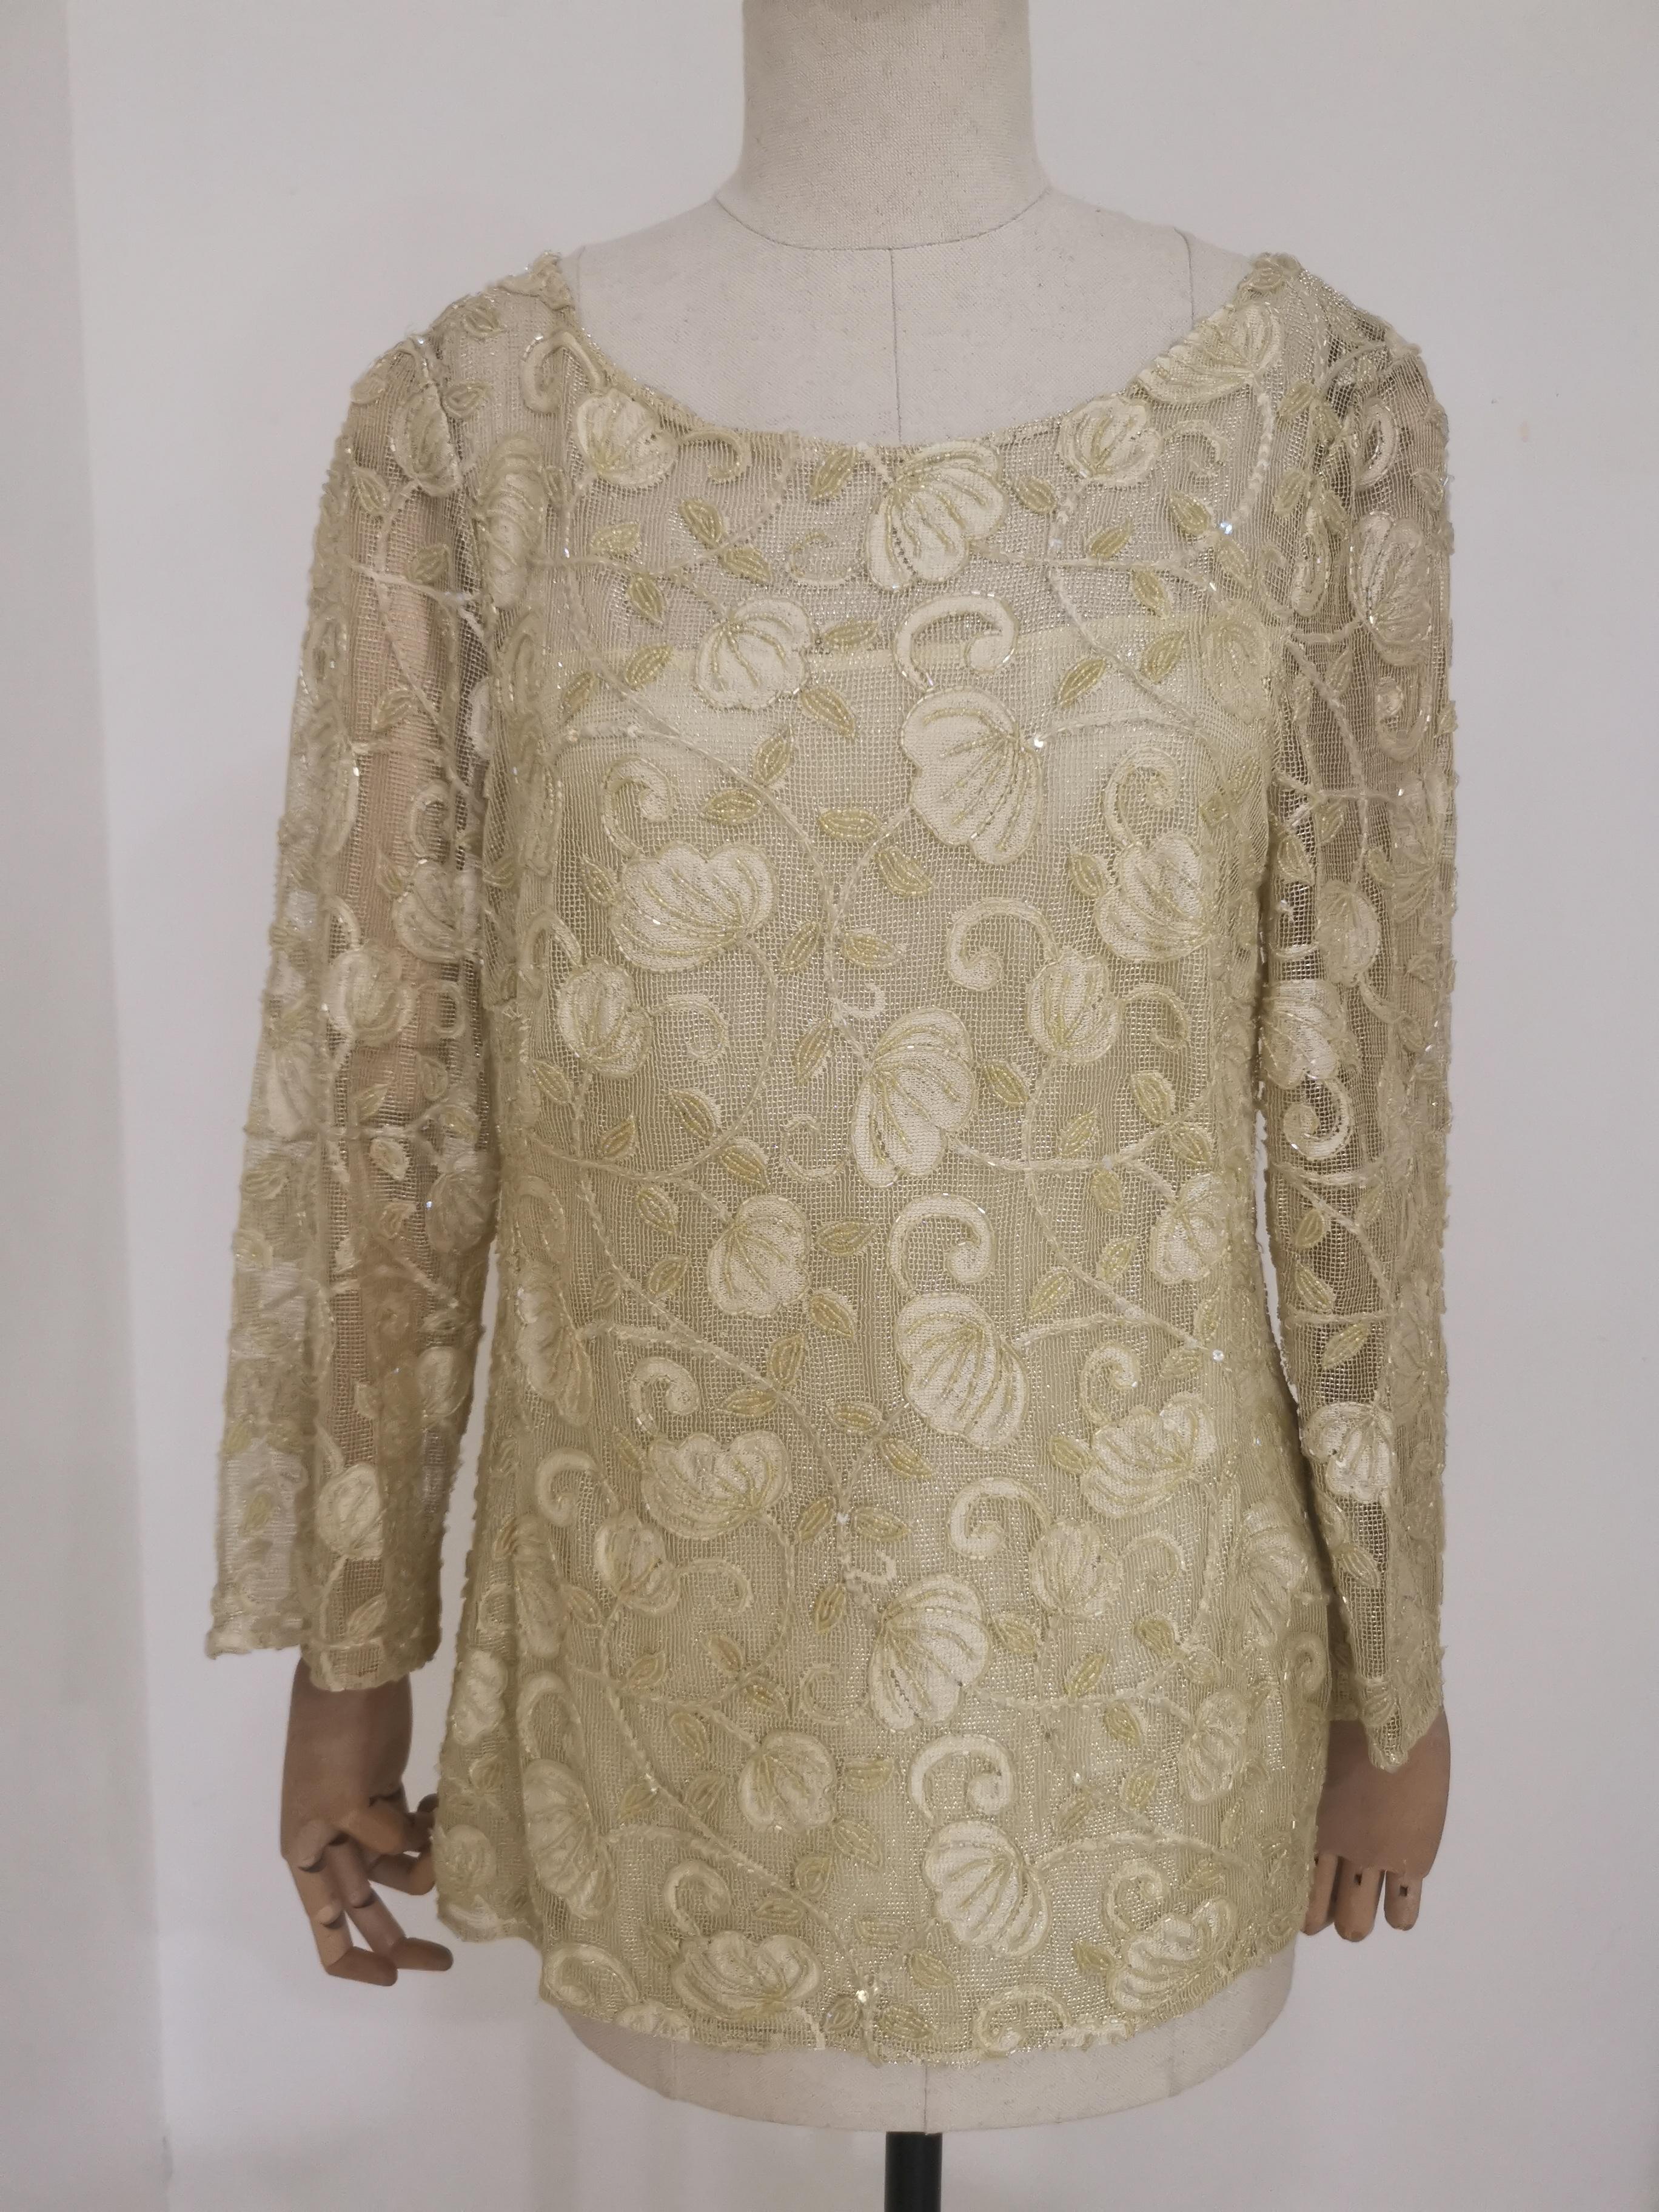 Vintage Light Yellow beads blouse t-shirt
total lenght 67 cm